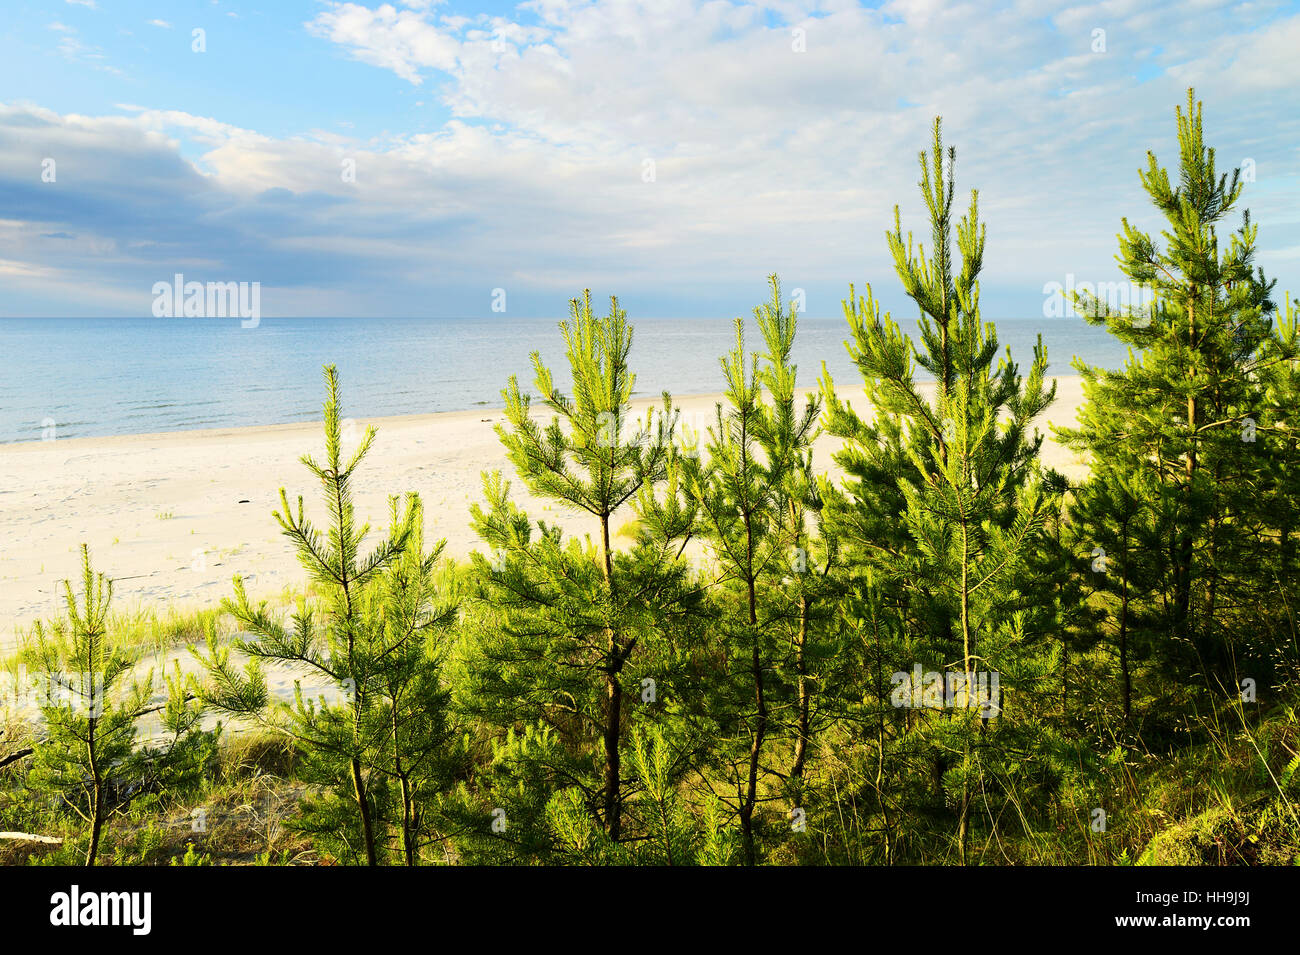 Young Scots or Scotch pine (Pinus sylvestris L.) trees growing on dunes near Baltic sea. Evergreen coniferous forest. Pomerania, Poland. Stock Photo